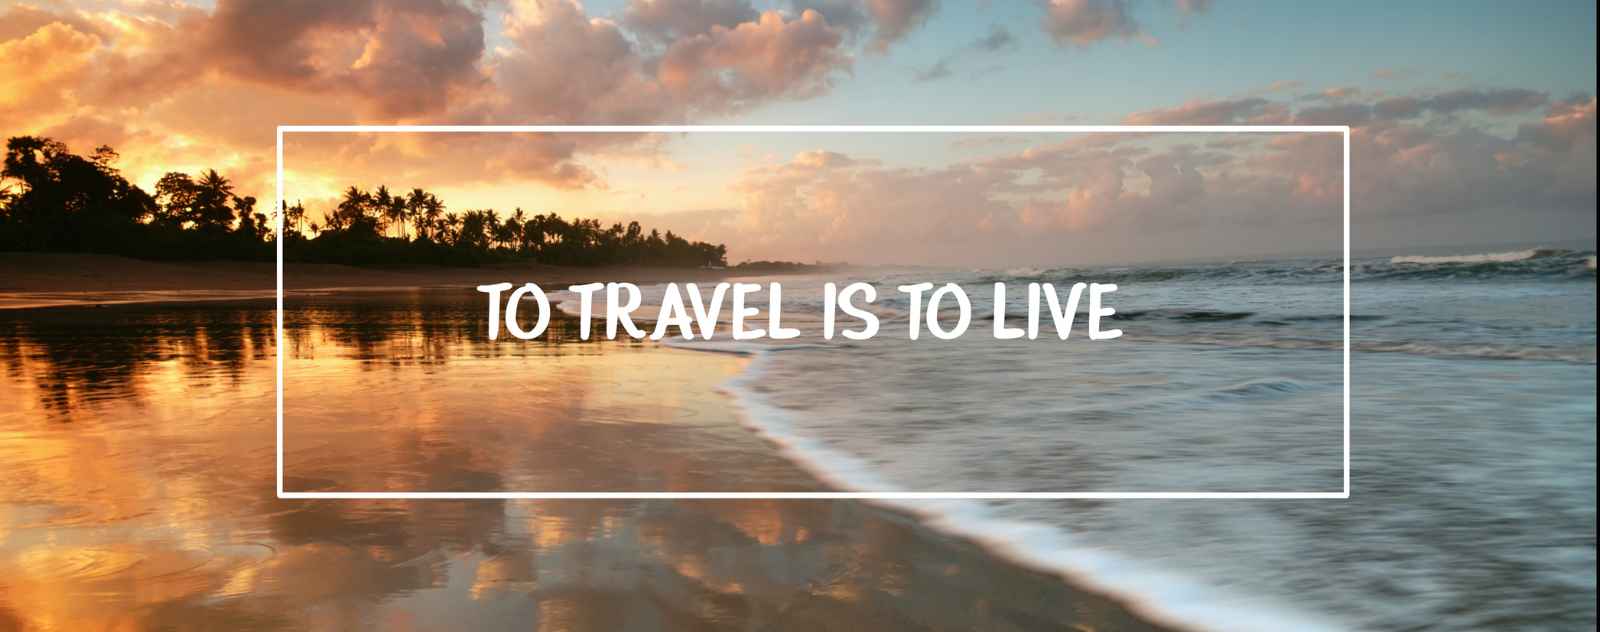 50 Inspirational Travel Quotes to Fuel Your Wanderlust